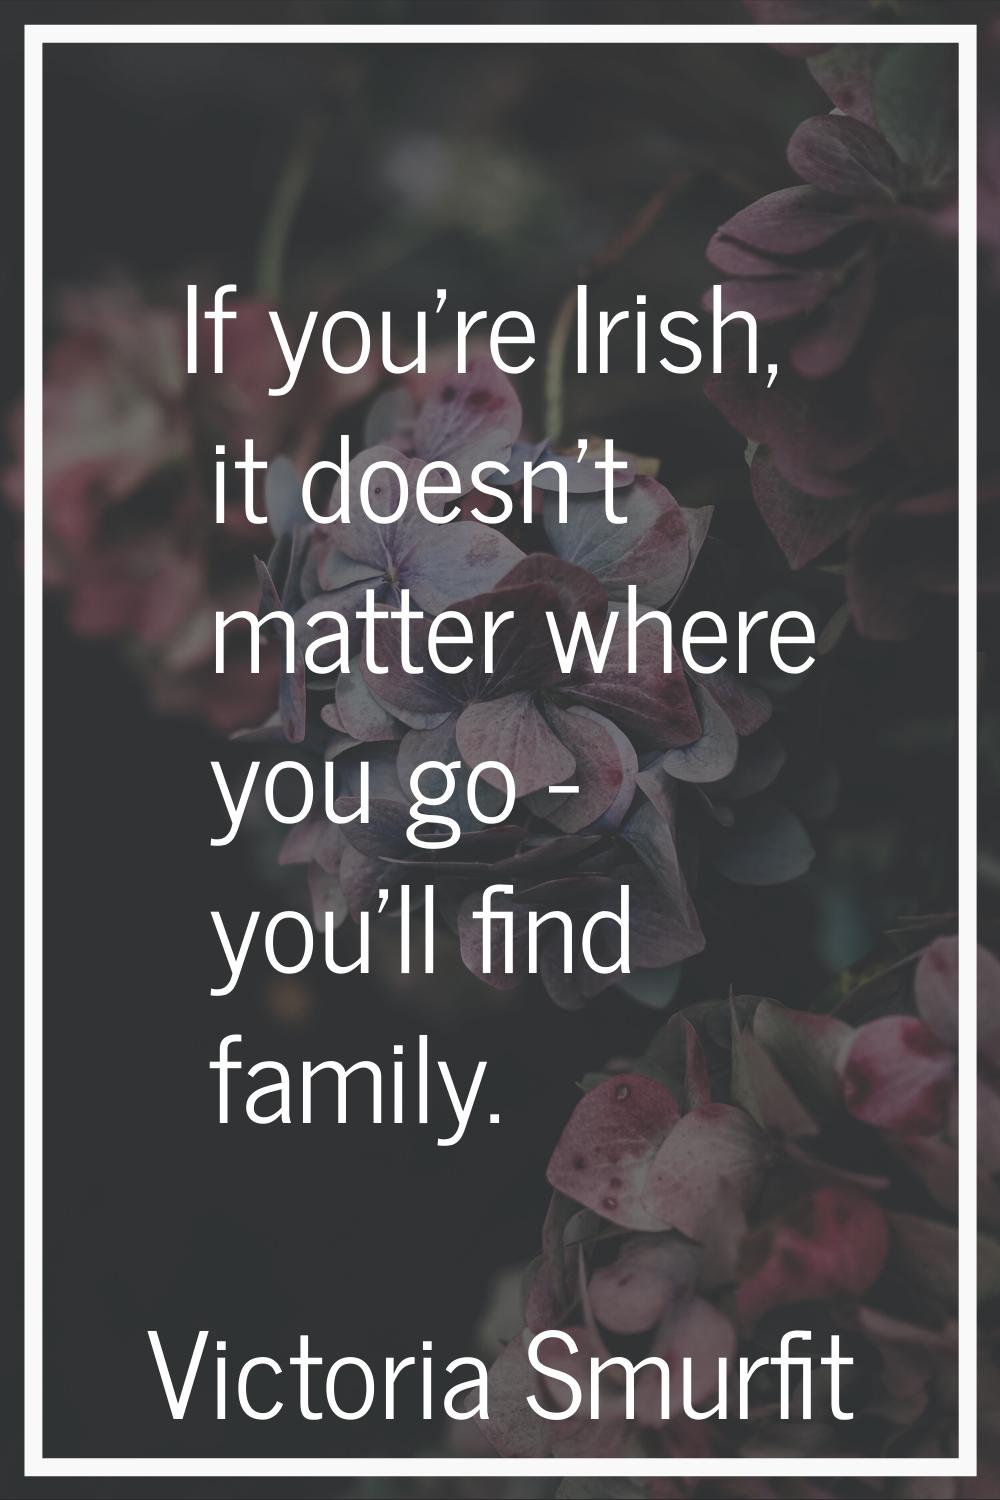 If you're Irish, it doesn't matter where you go - you'll find family.